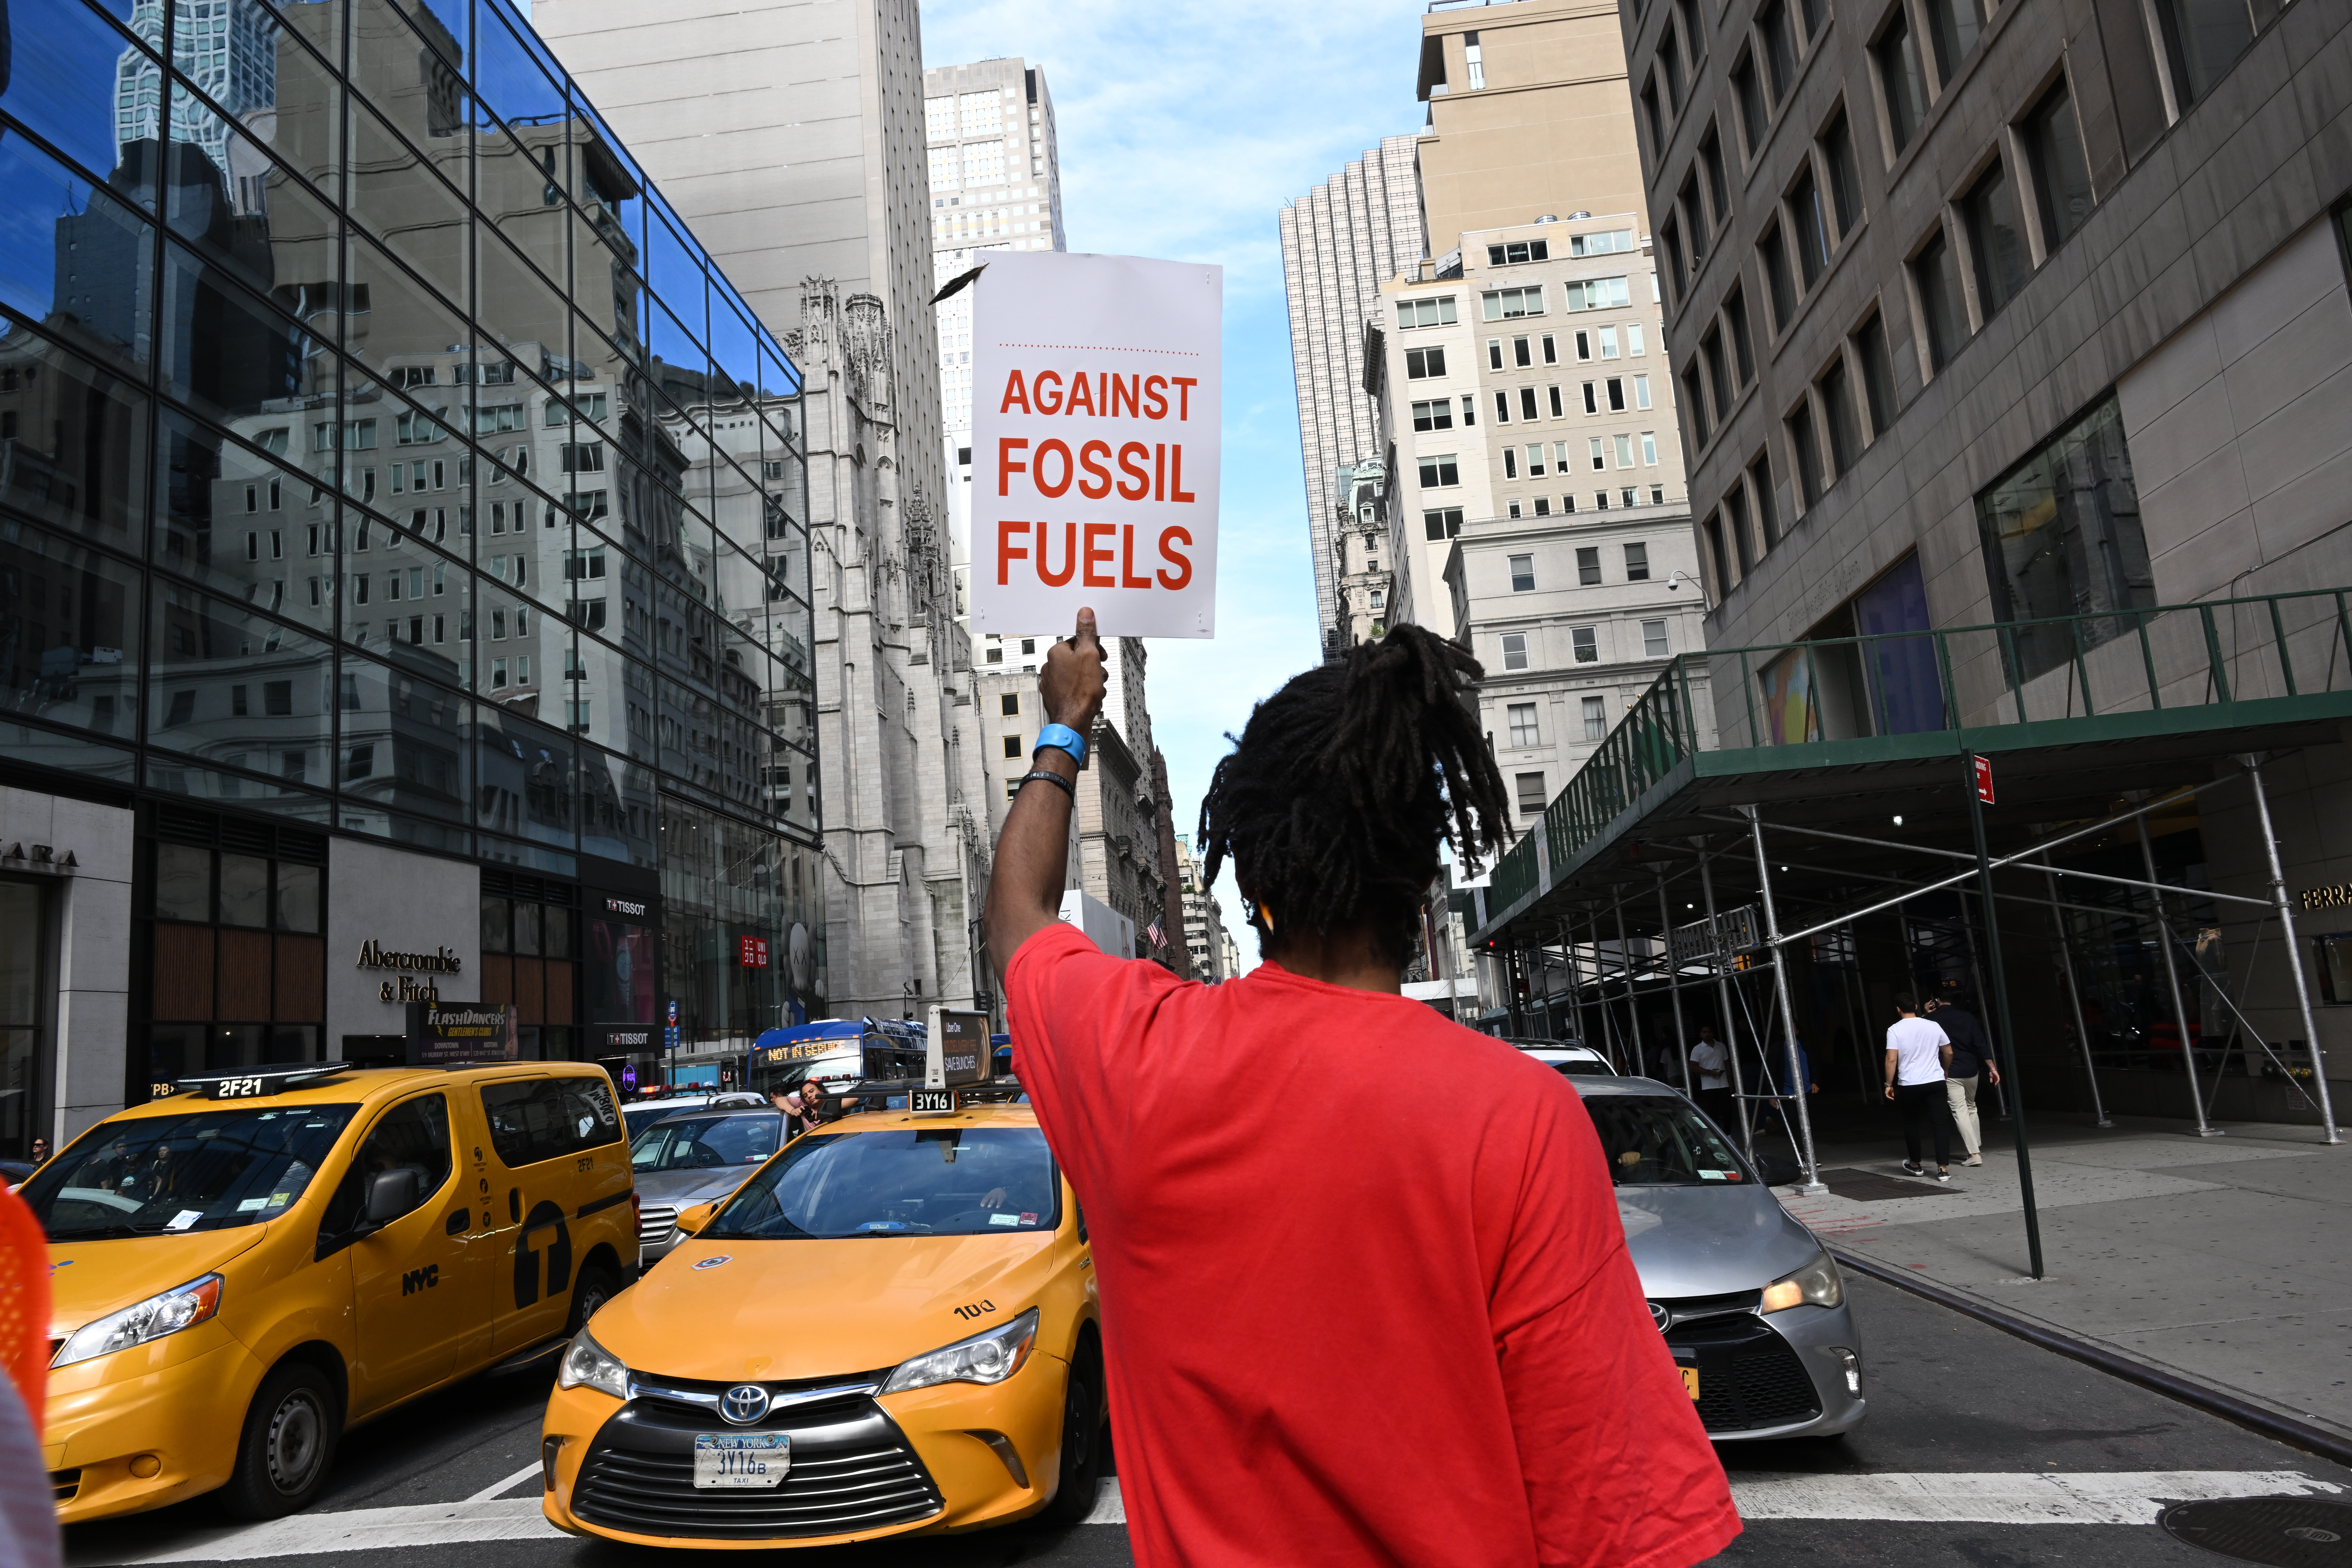 A person holds up a sign "against fossil fuels" during Climate Week in New York City.